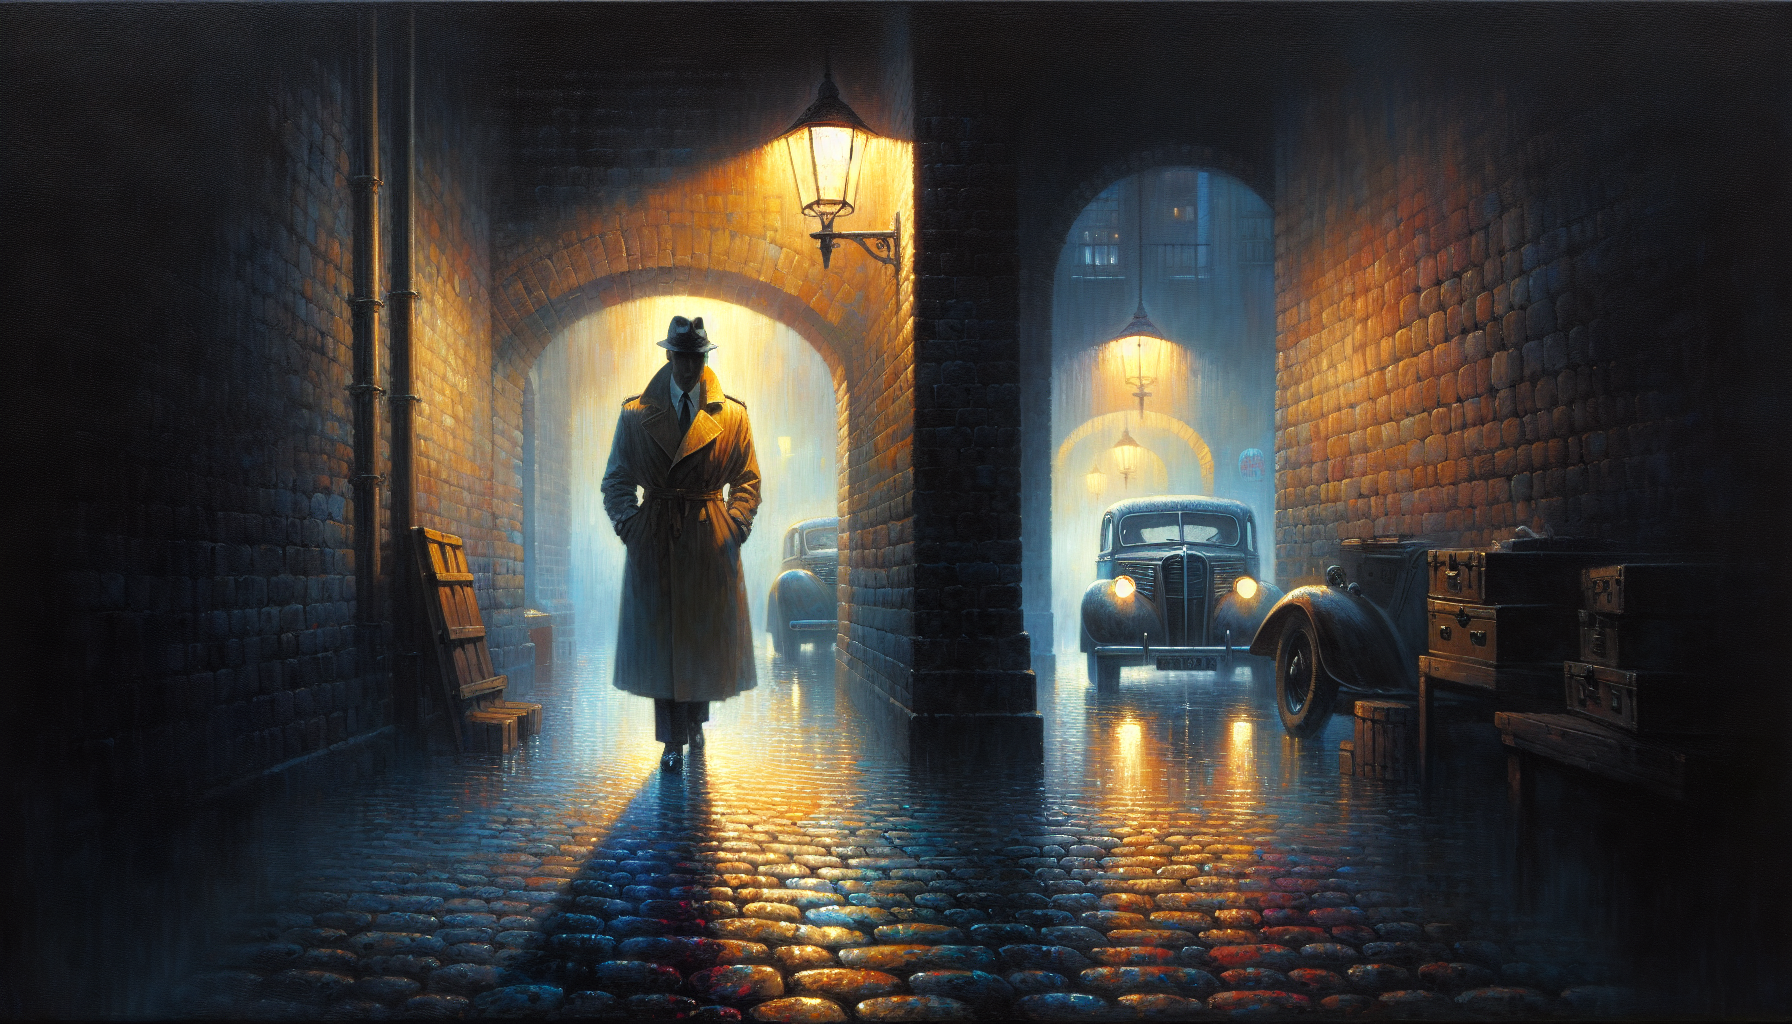 A dimly lit alleyway at midnight, shrouded in fog with rain-slicked cobblestones reflecting the faint glow of a streetlamp, featuring a mysterious figure in a classic trench coat and fedora, casting a